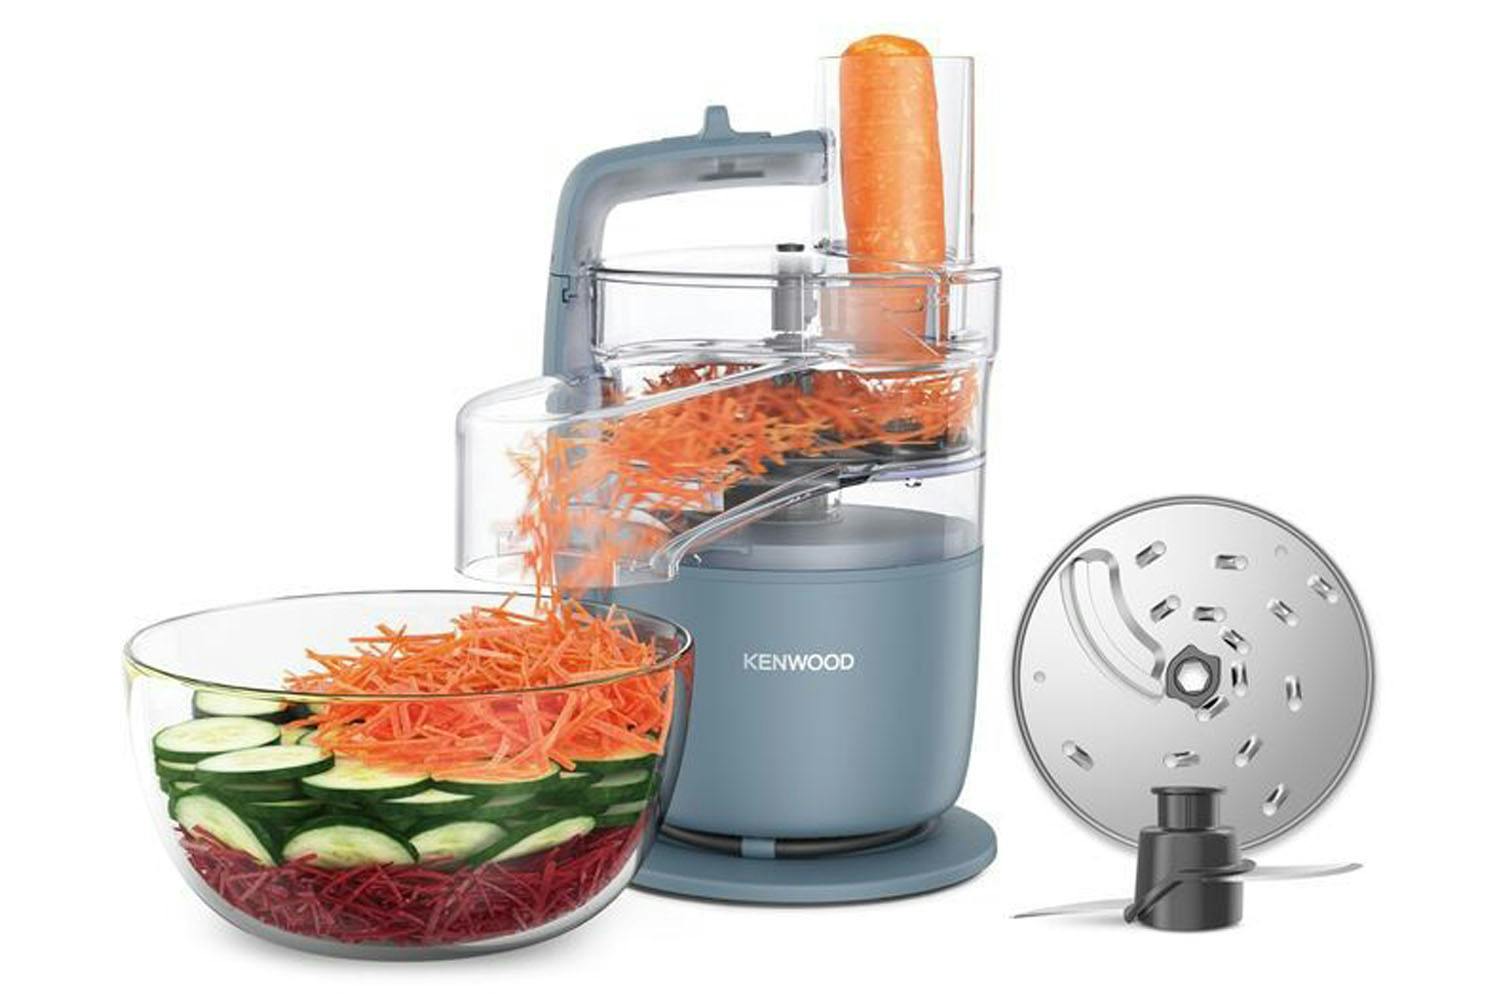 https://hniesfp.imgix.net/8/images/detailed/349/Food_Processor_Kenwood_FDP22.130GY.jpg?fit=fill&bg=0FFF&w=1500&h=1000&auto=format,compress